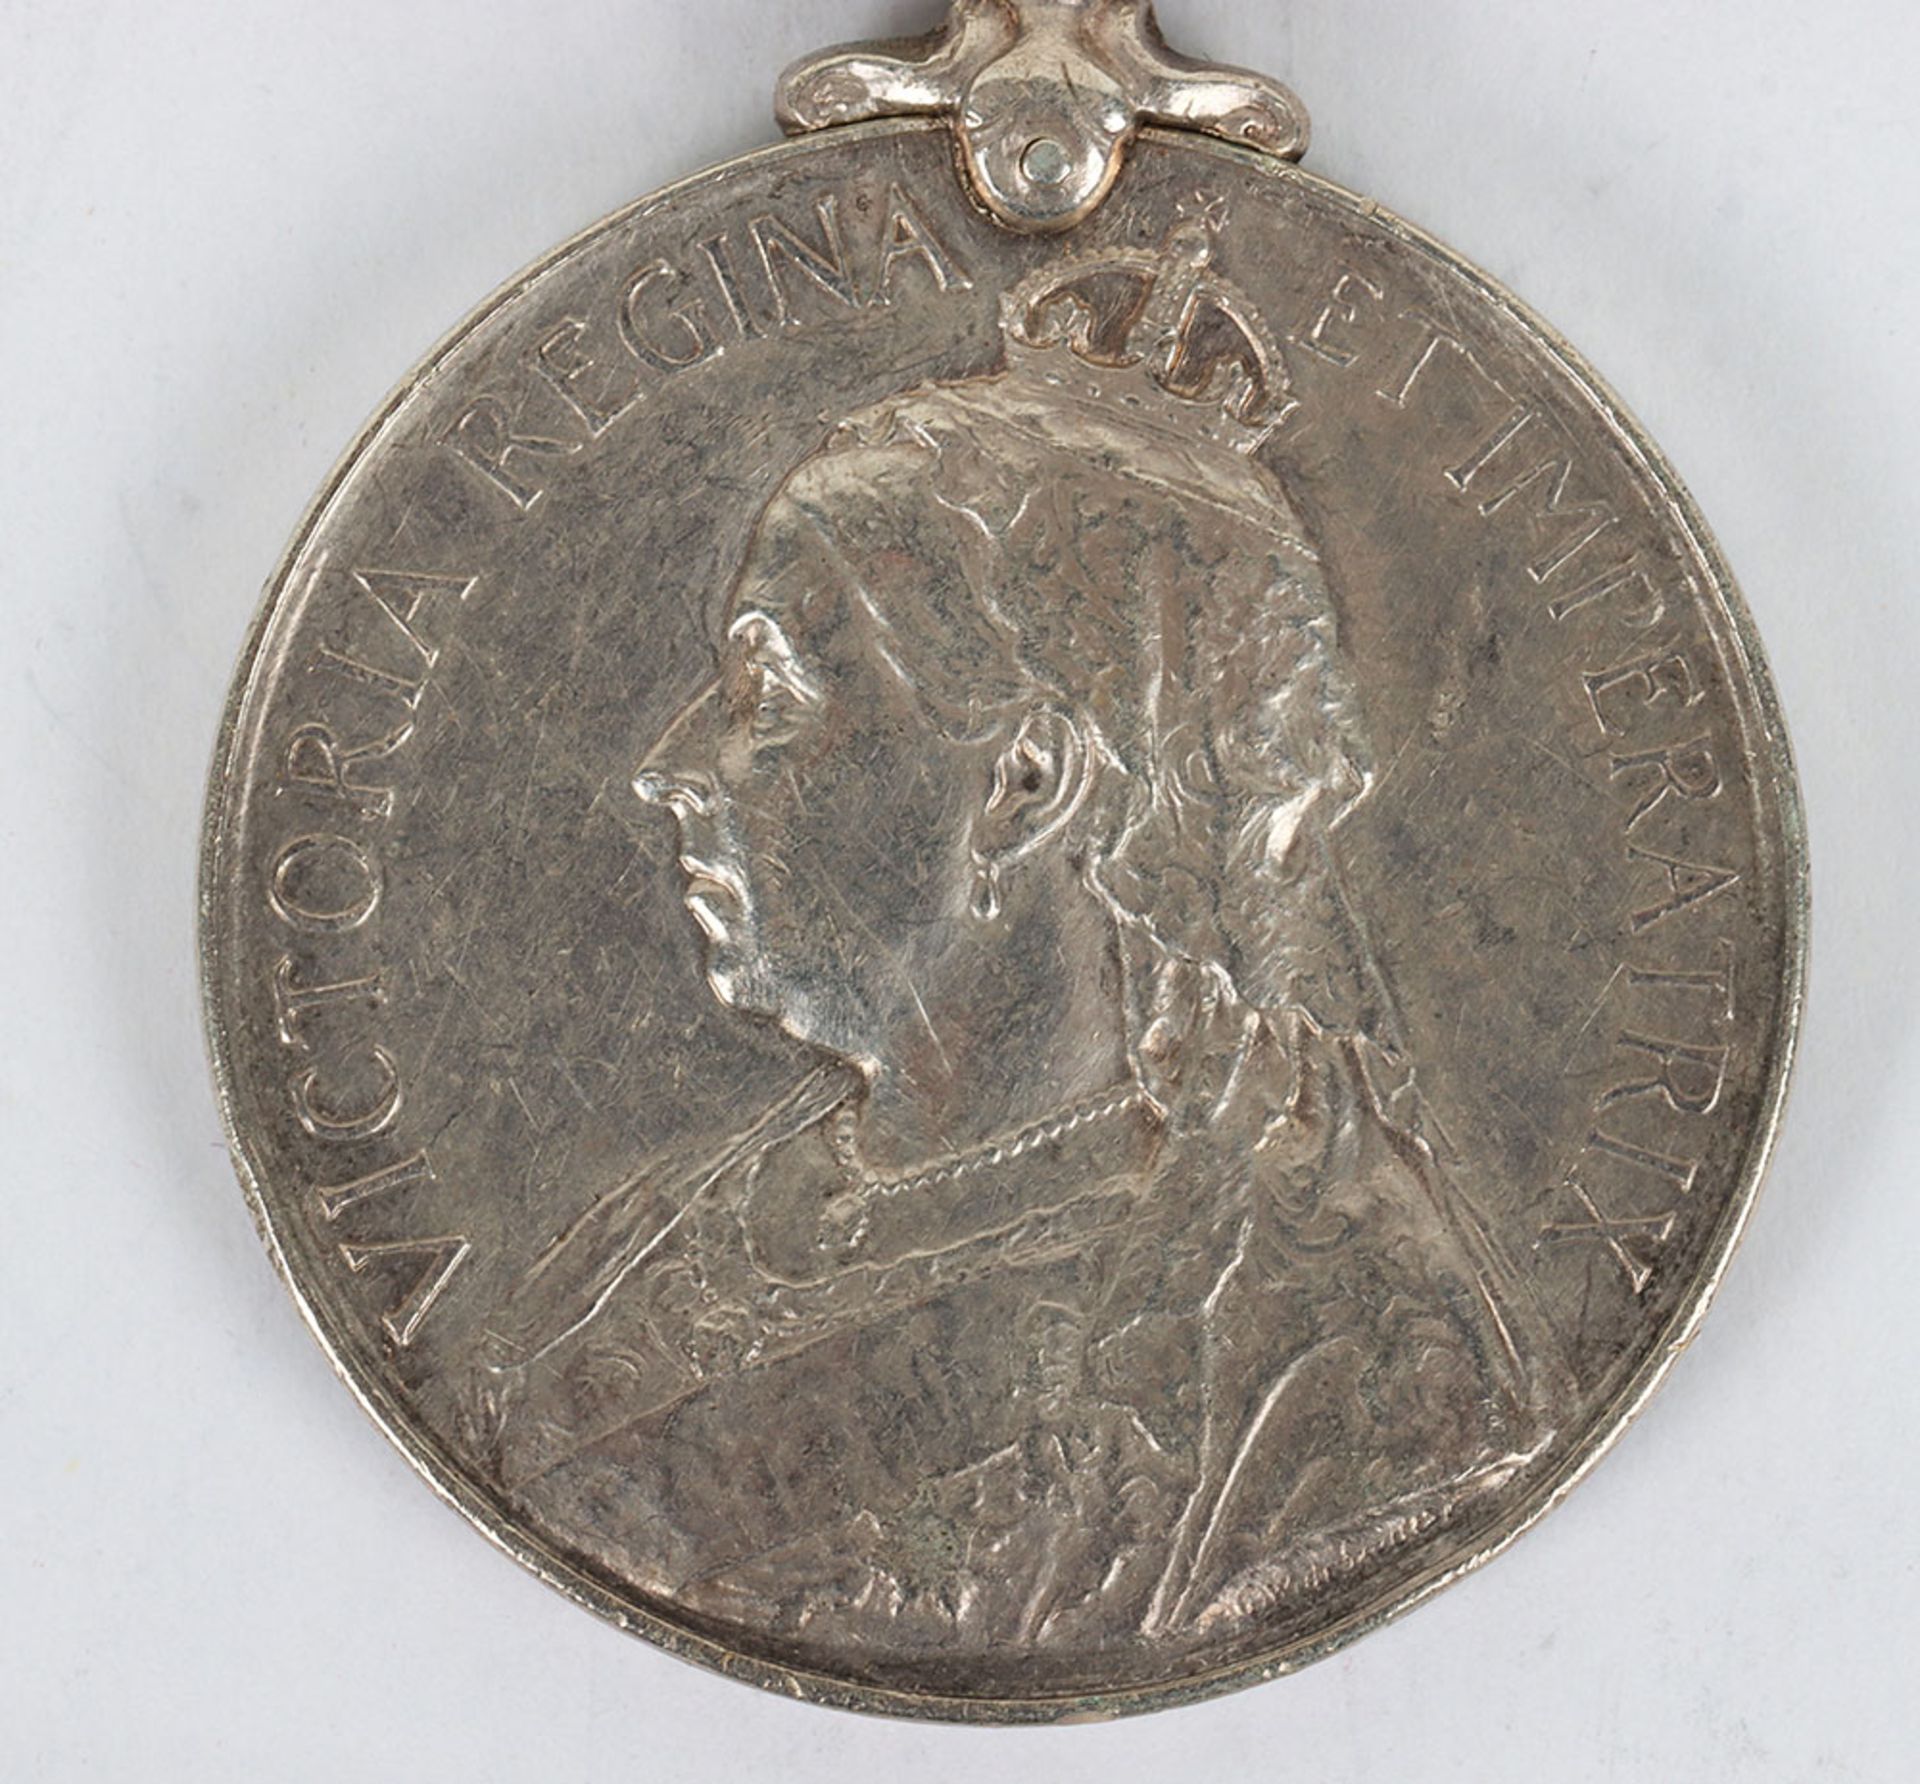 Queens South Africa Medal to the 7th (Leicestershire) Company Imperial Yeomanry - Image 3 of 7